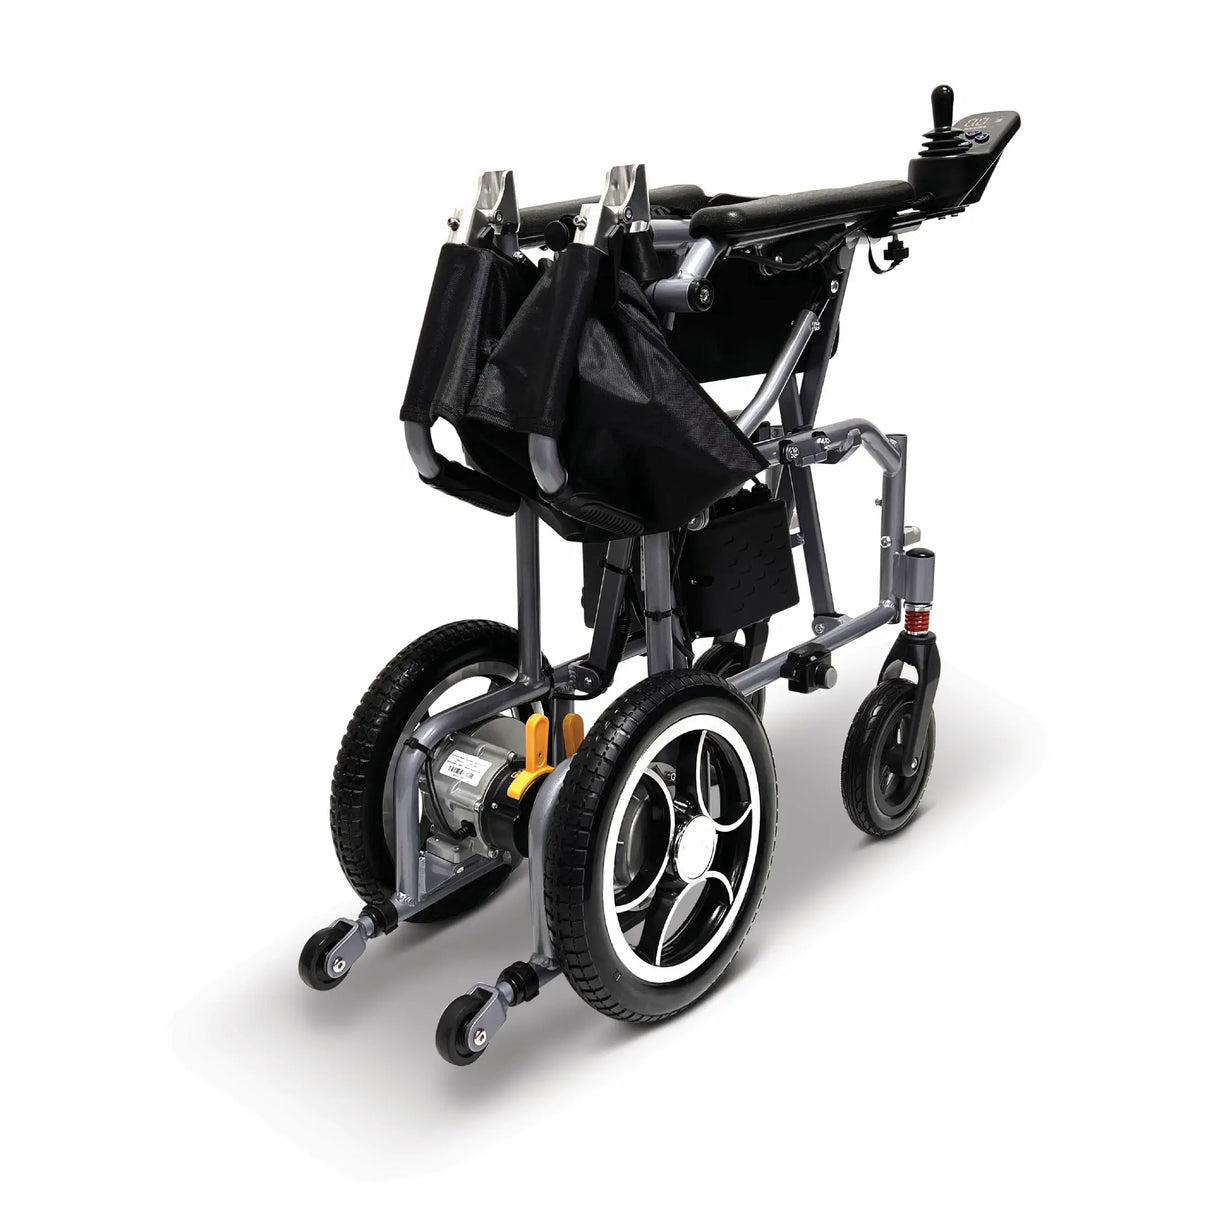 ComfyGo X-7 Lightweight Foldable Electric Wheelchair For Travel With Remote Control